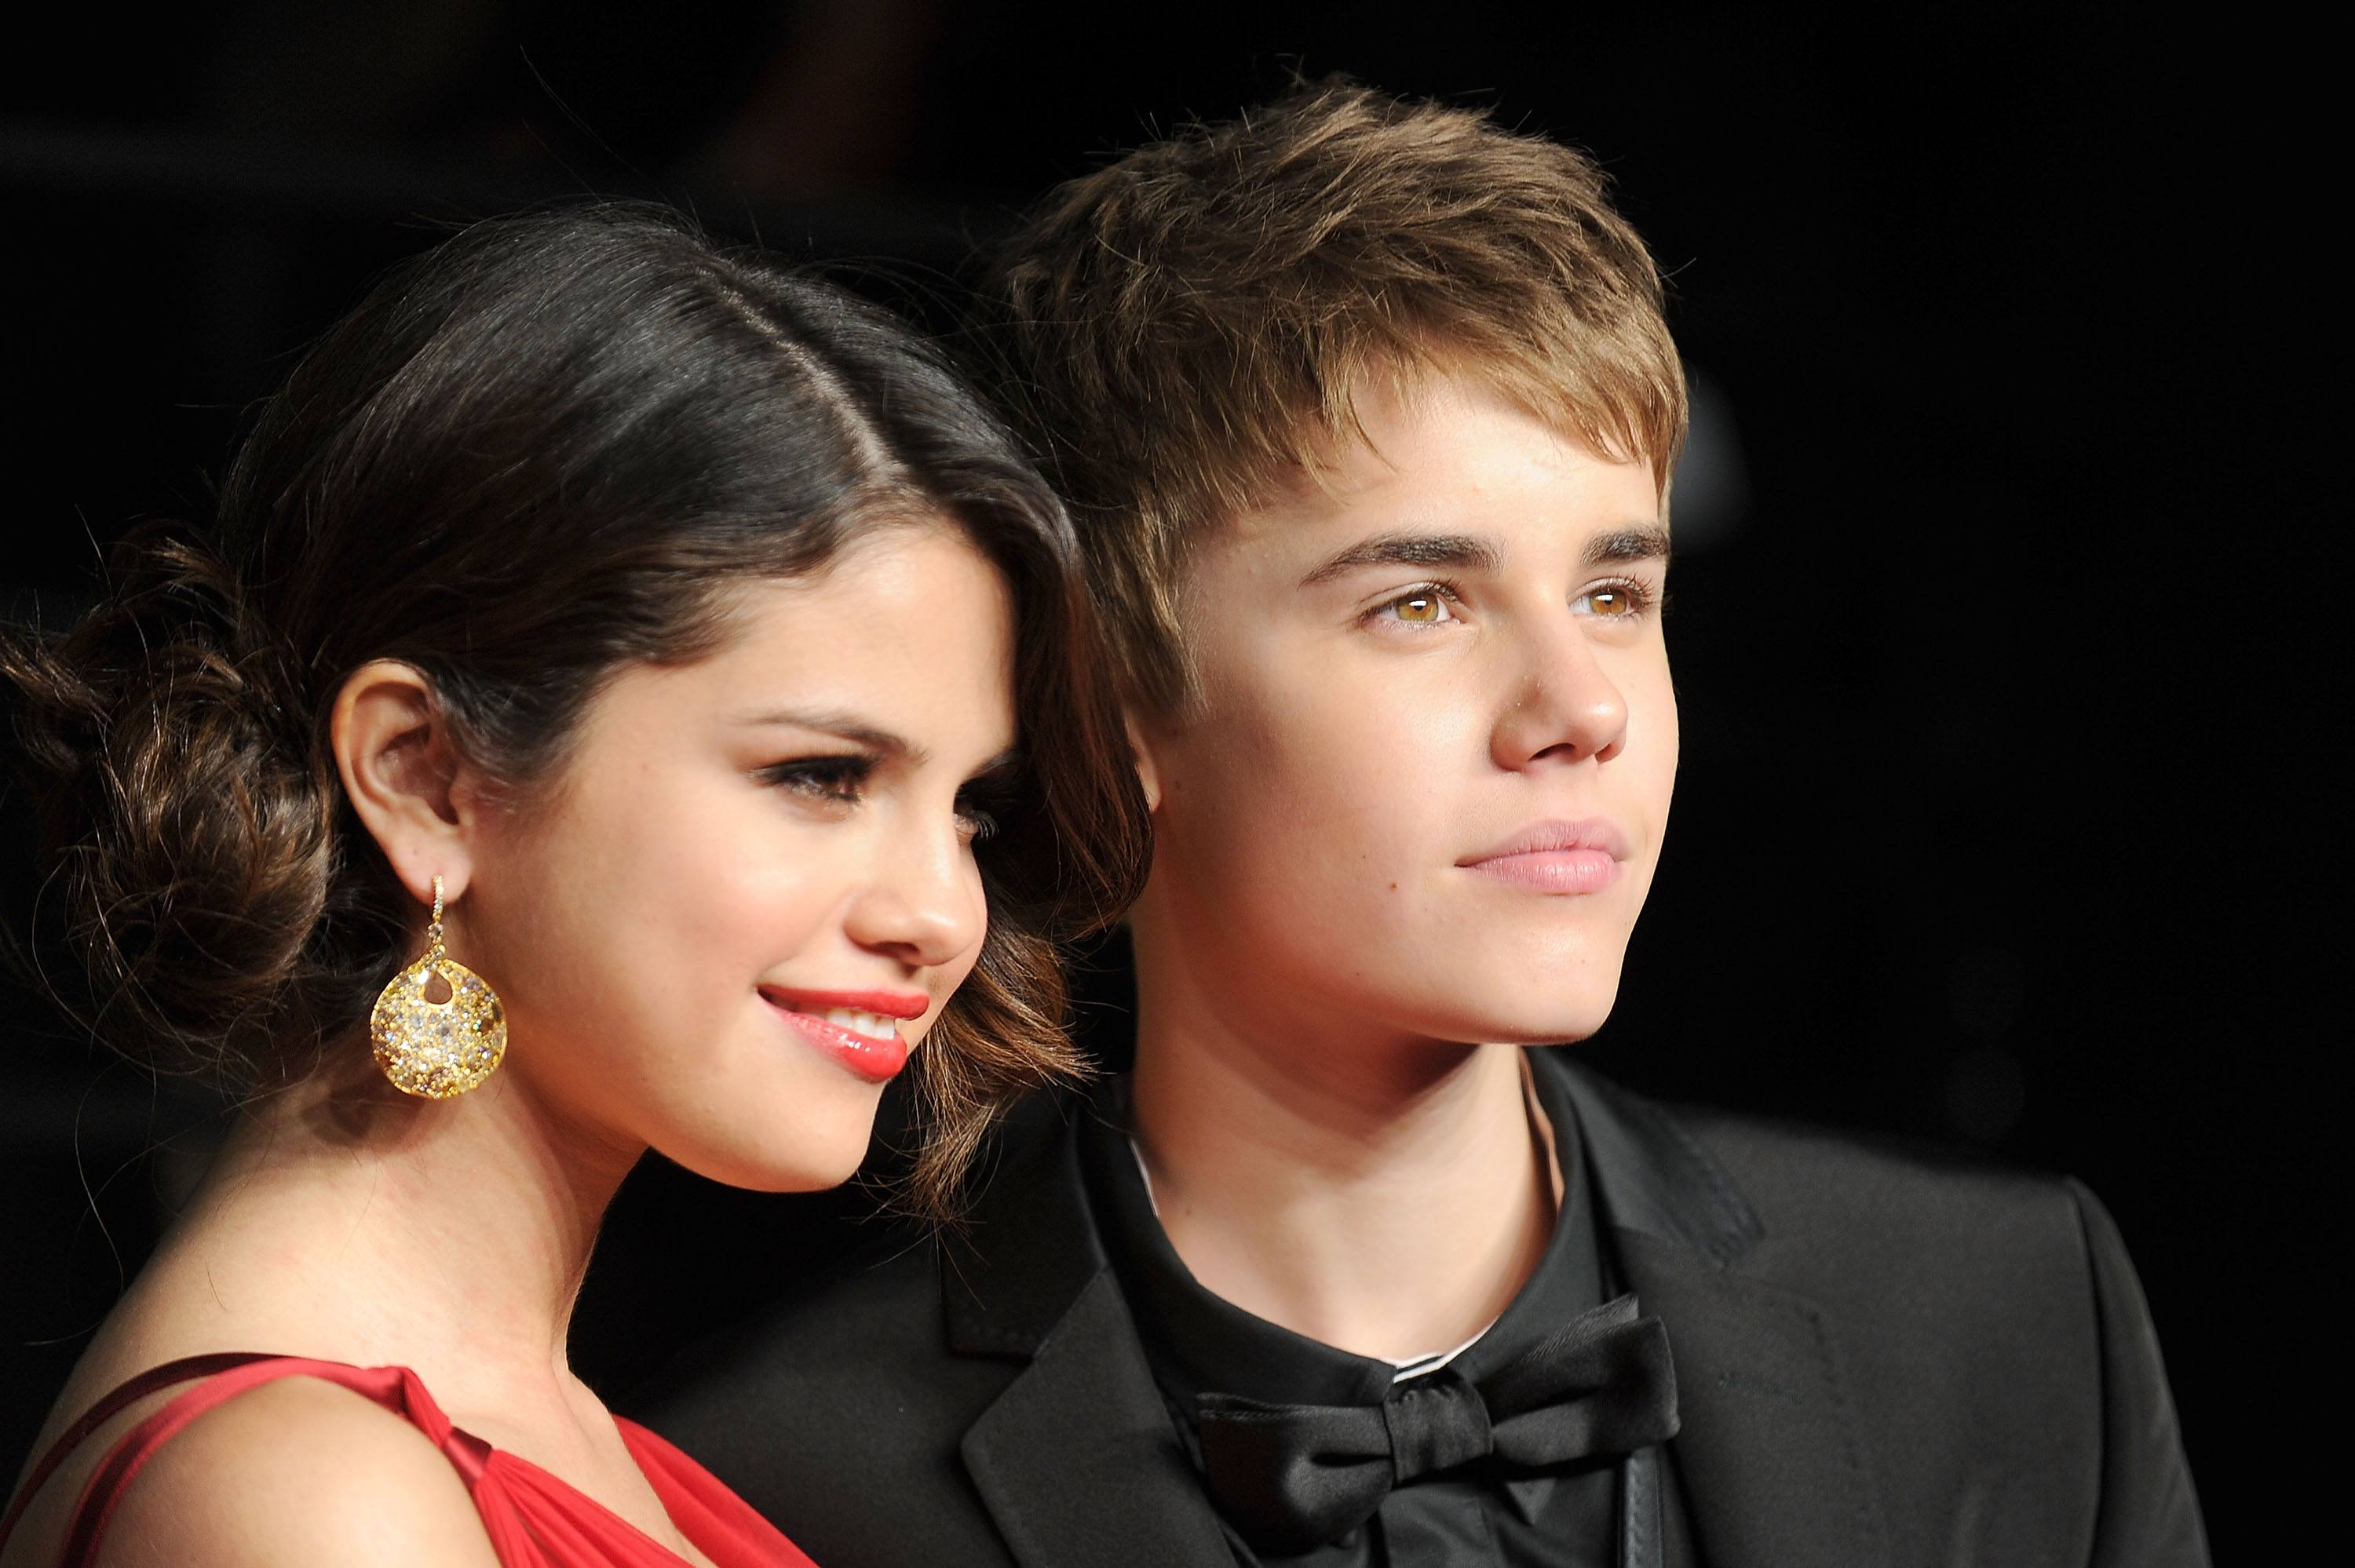 Selena Gomez and Justin Bieber arrive at the Vanity Fair Oscar party.